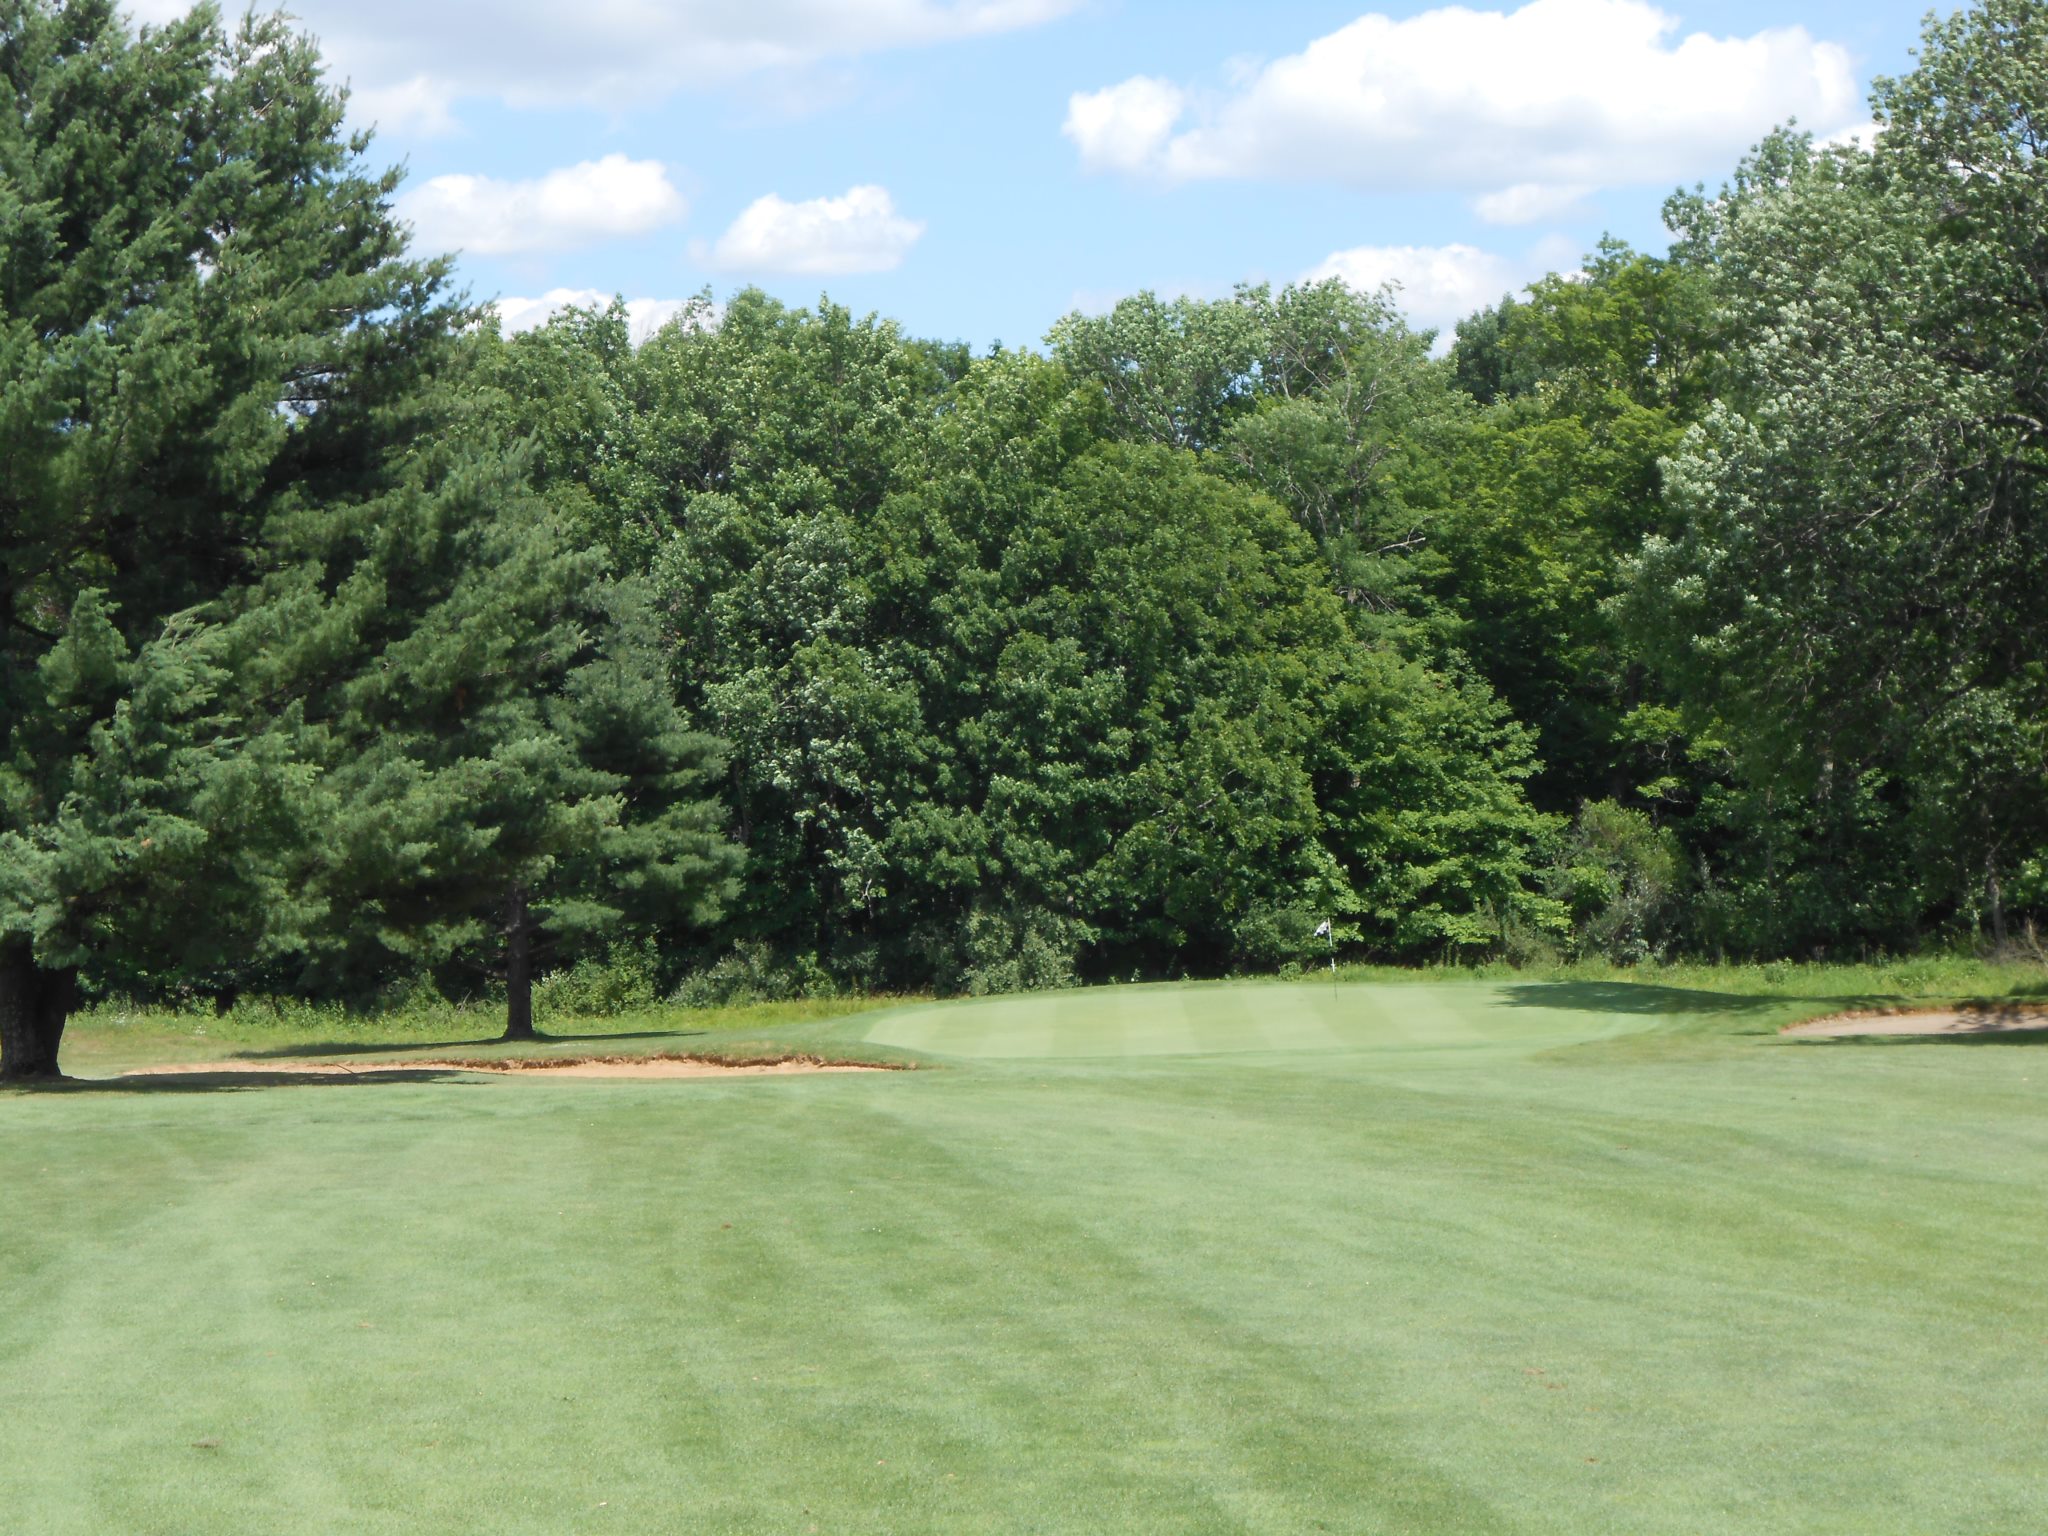 image of manicured course green with trees